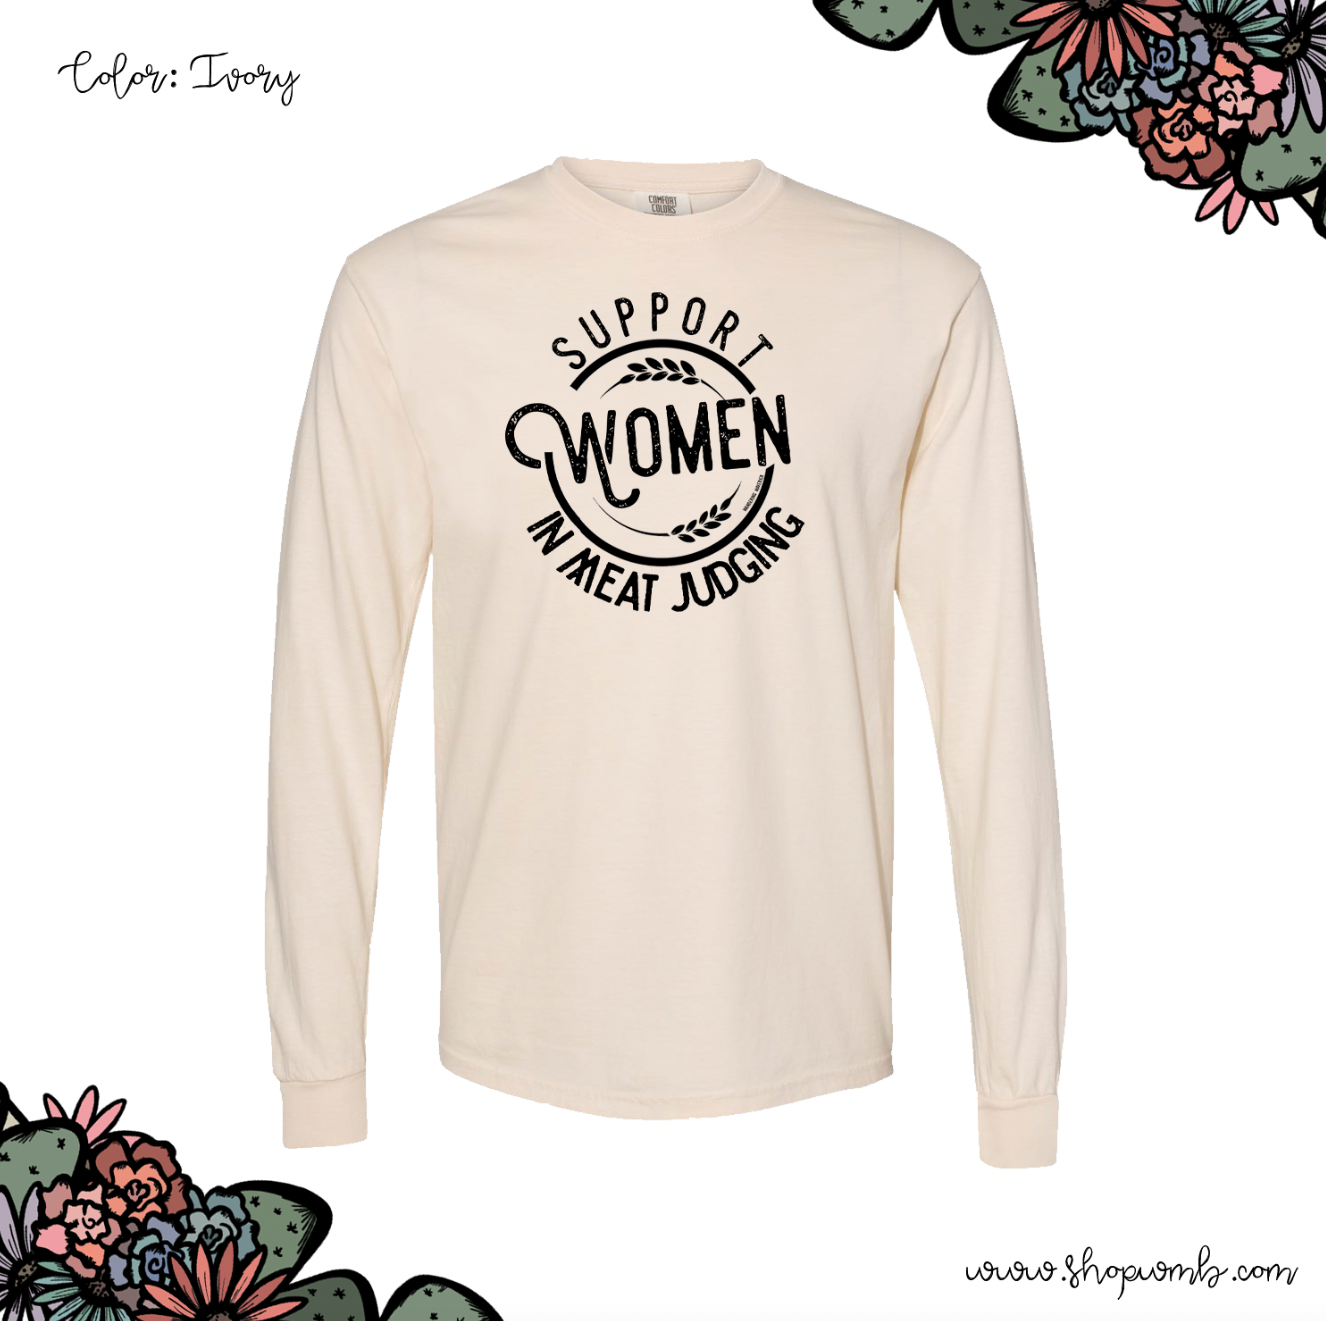 Support Women In Meat Judging LONG SLEEVE T-Shirt (S-3XL) - Multiple Colors!